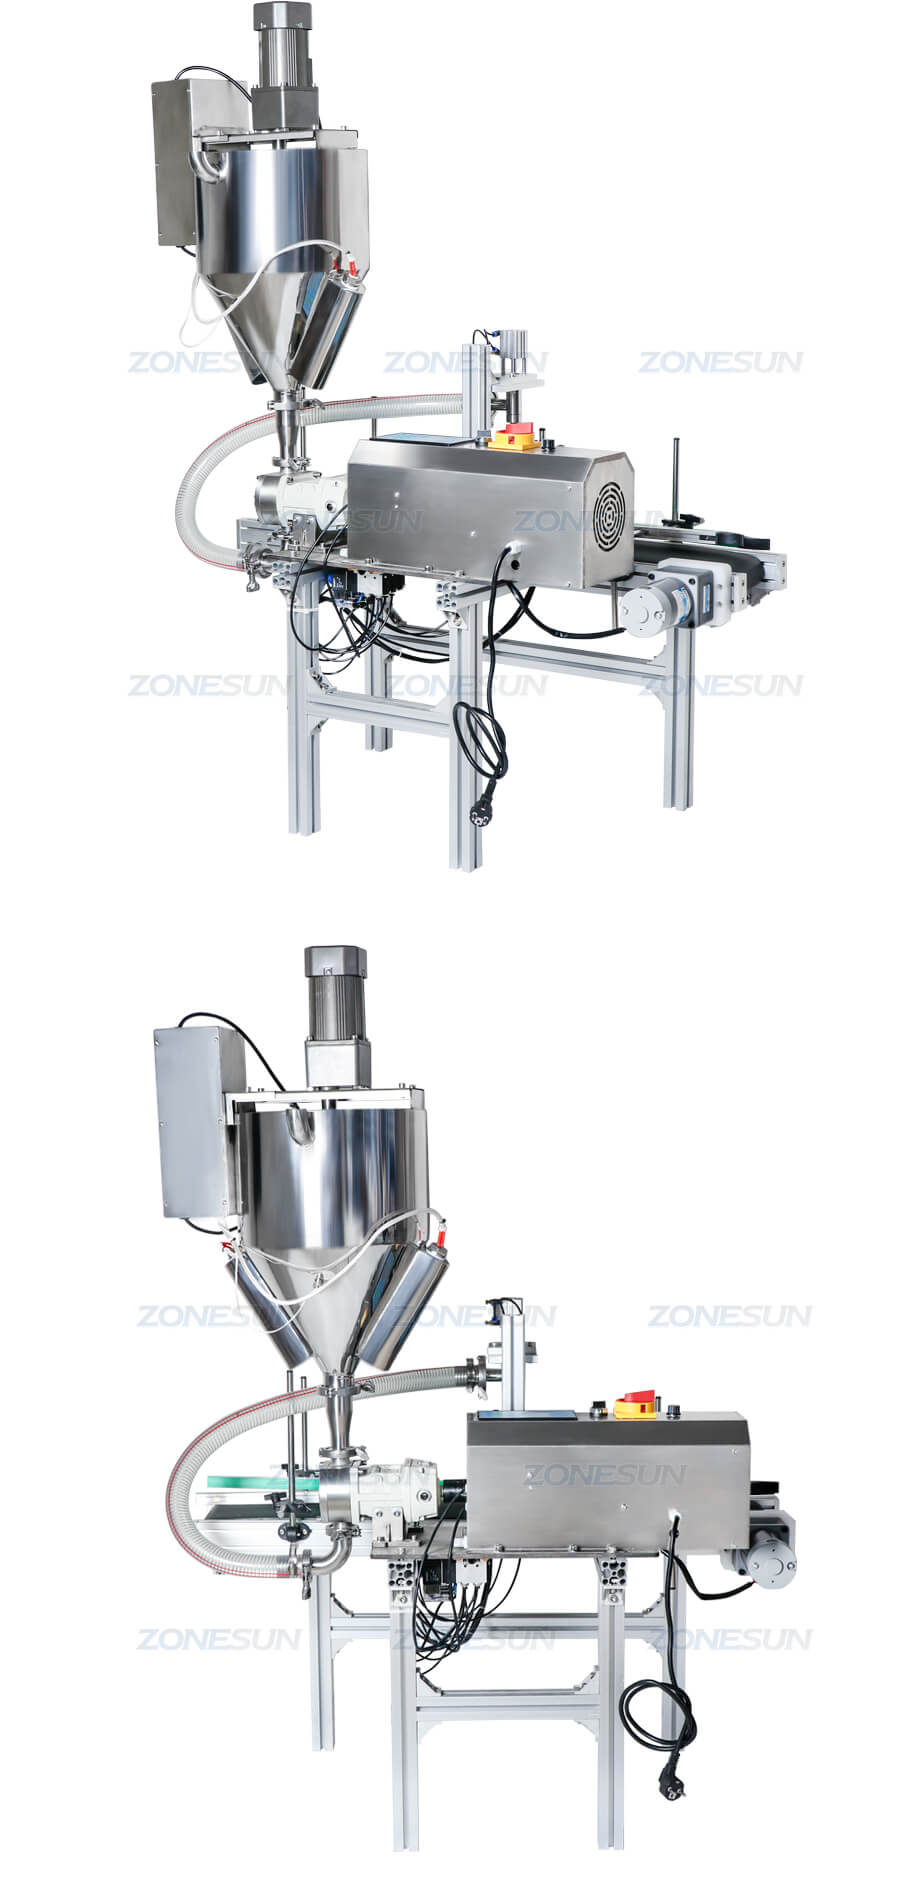 Paste Filling Machine With Mixer Heater